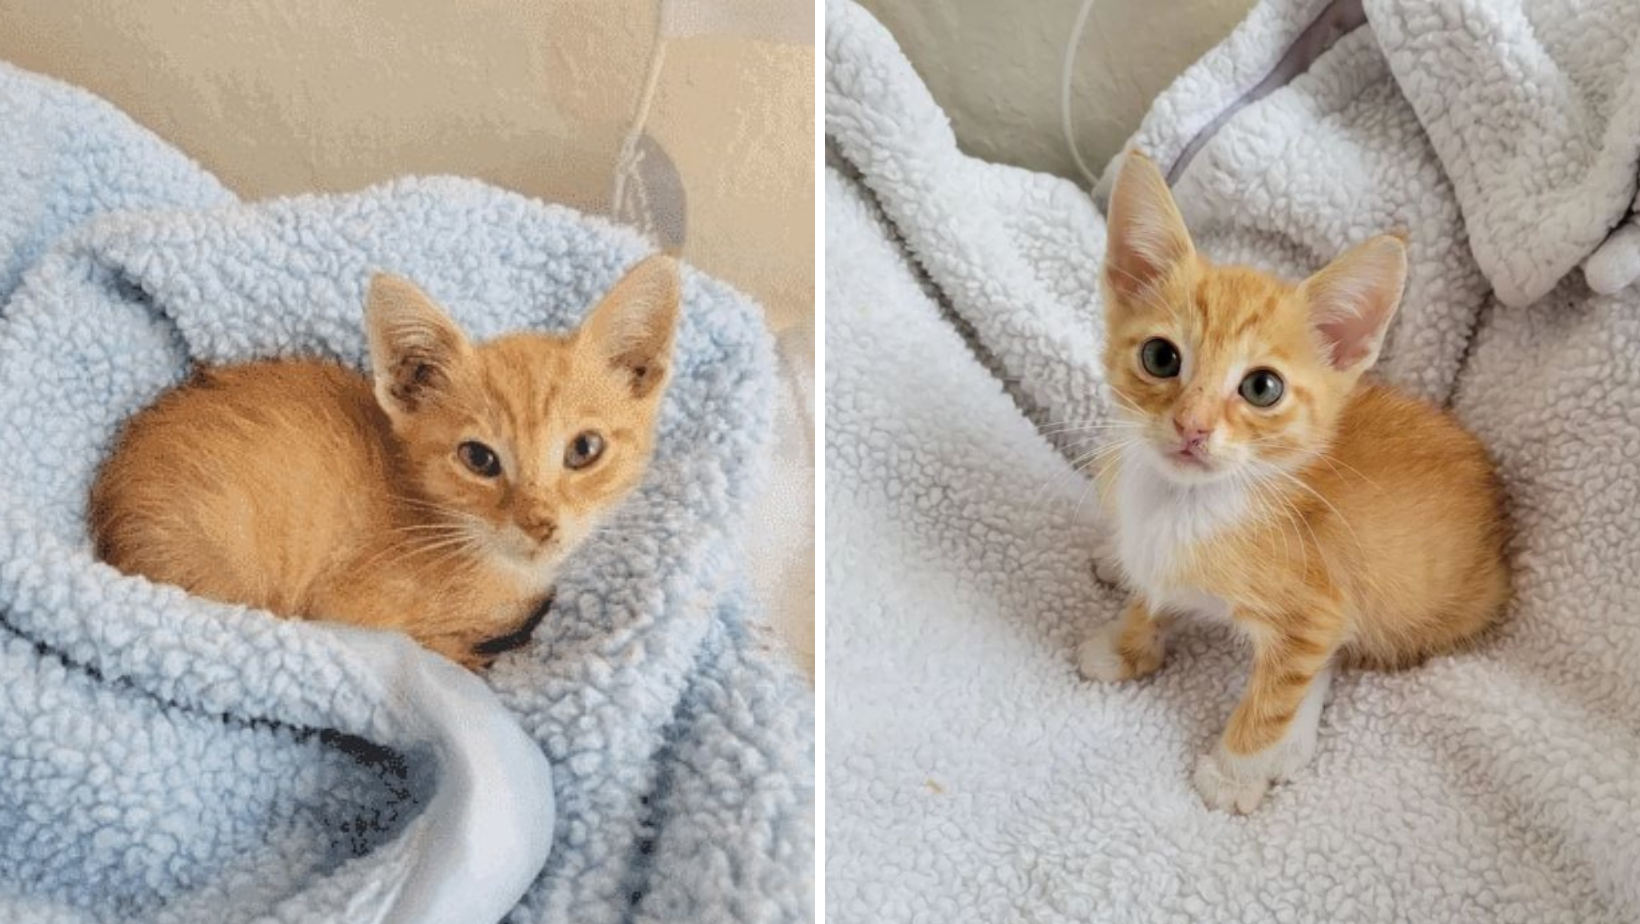 This Little Kitten Was Found All Alone And Is In Need Of Help